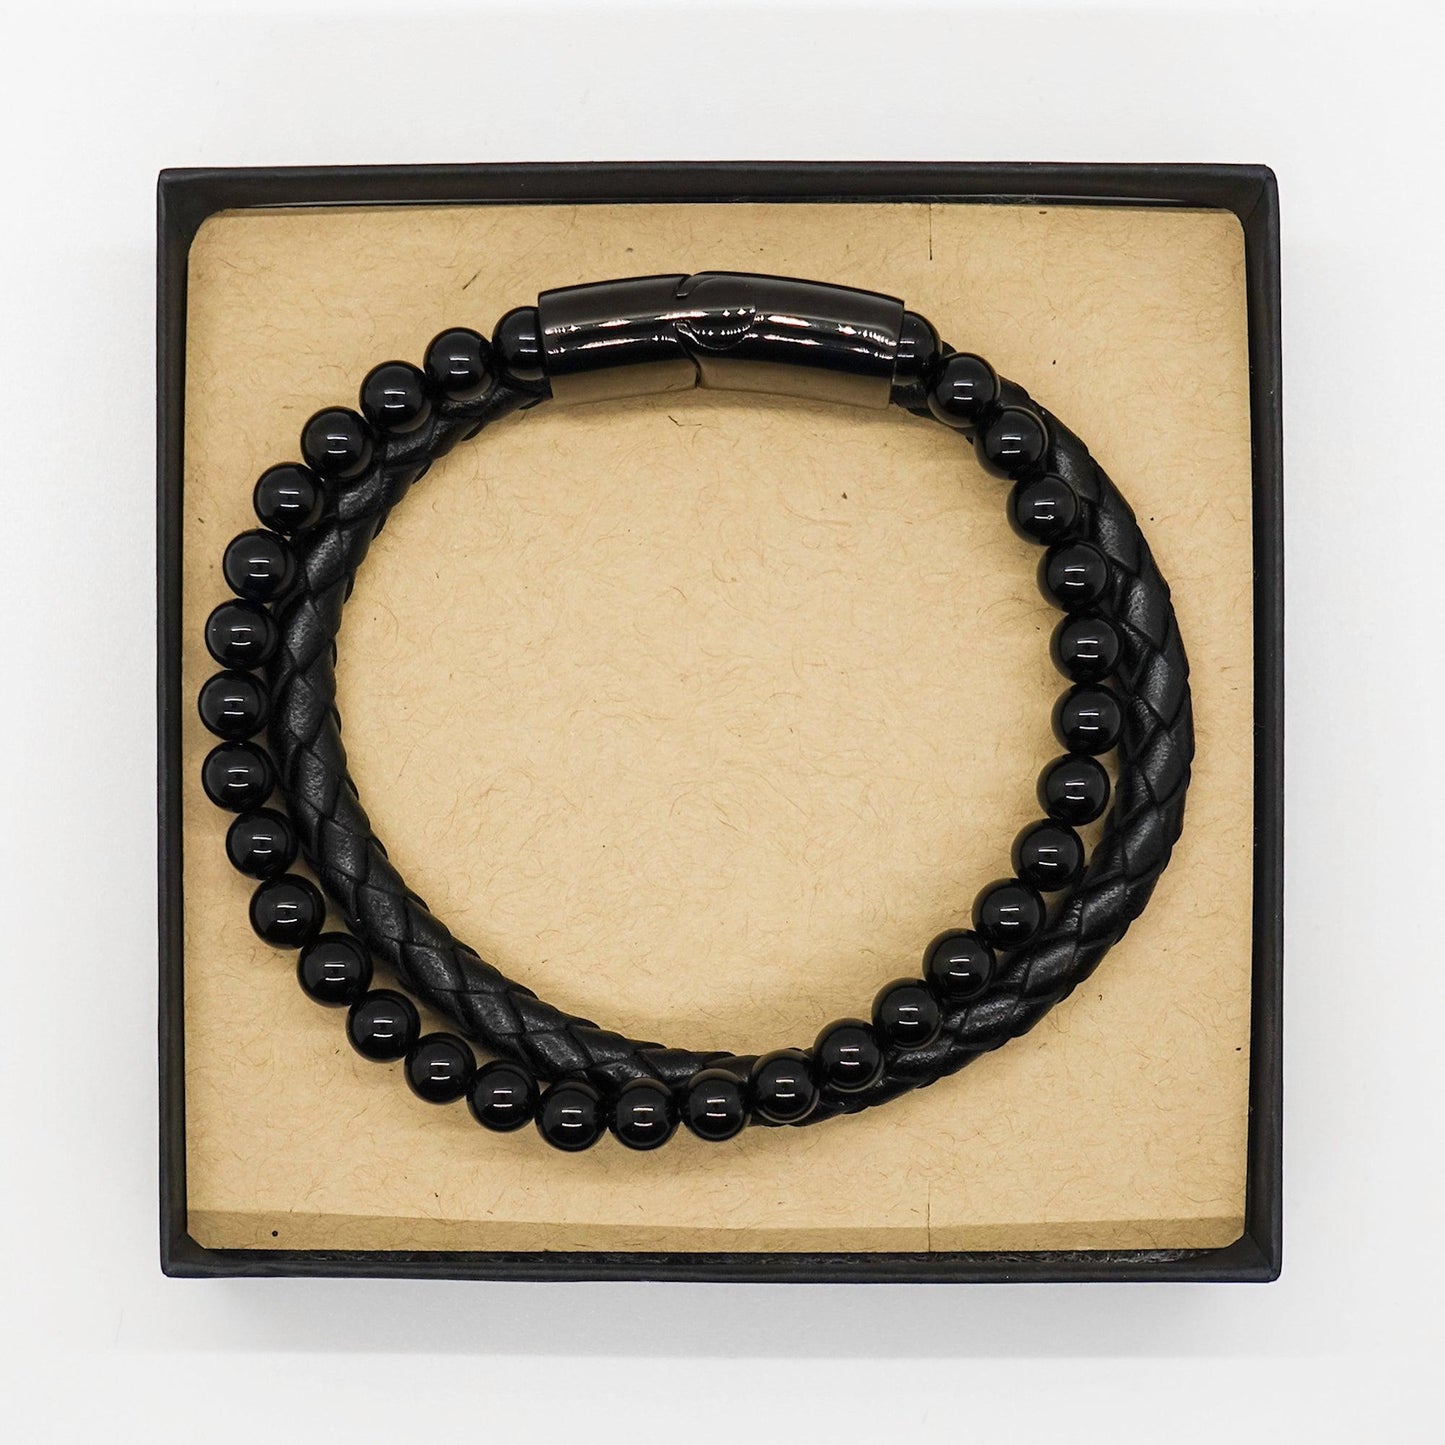 Dancer Black Braided Leather Stone Bracelet - Thanks for being who you are - Birthday Christmas Jewelry Gifts Coworkers Colleague Boss - Mallard Moon Gift Shop